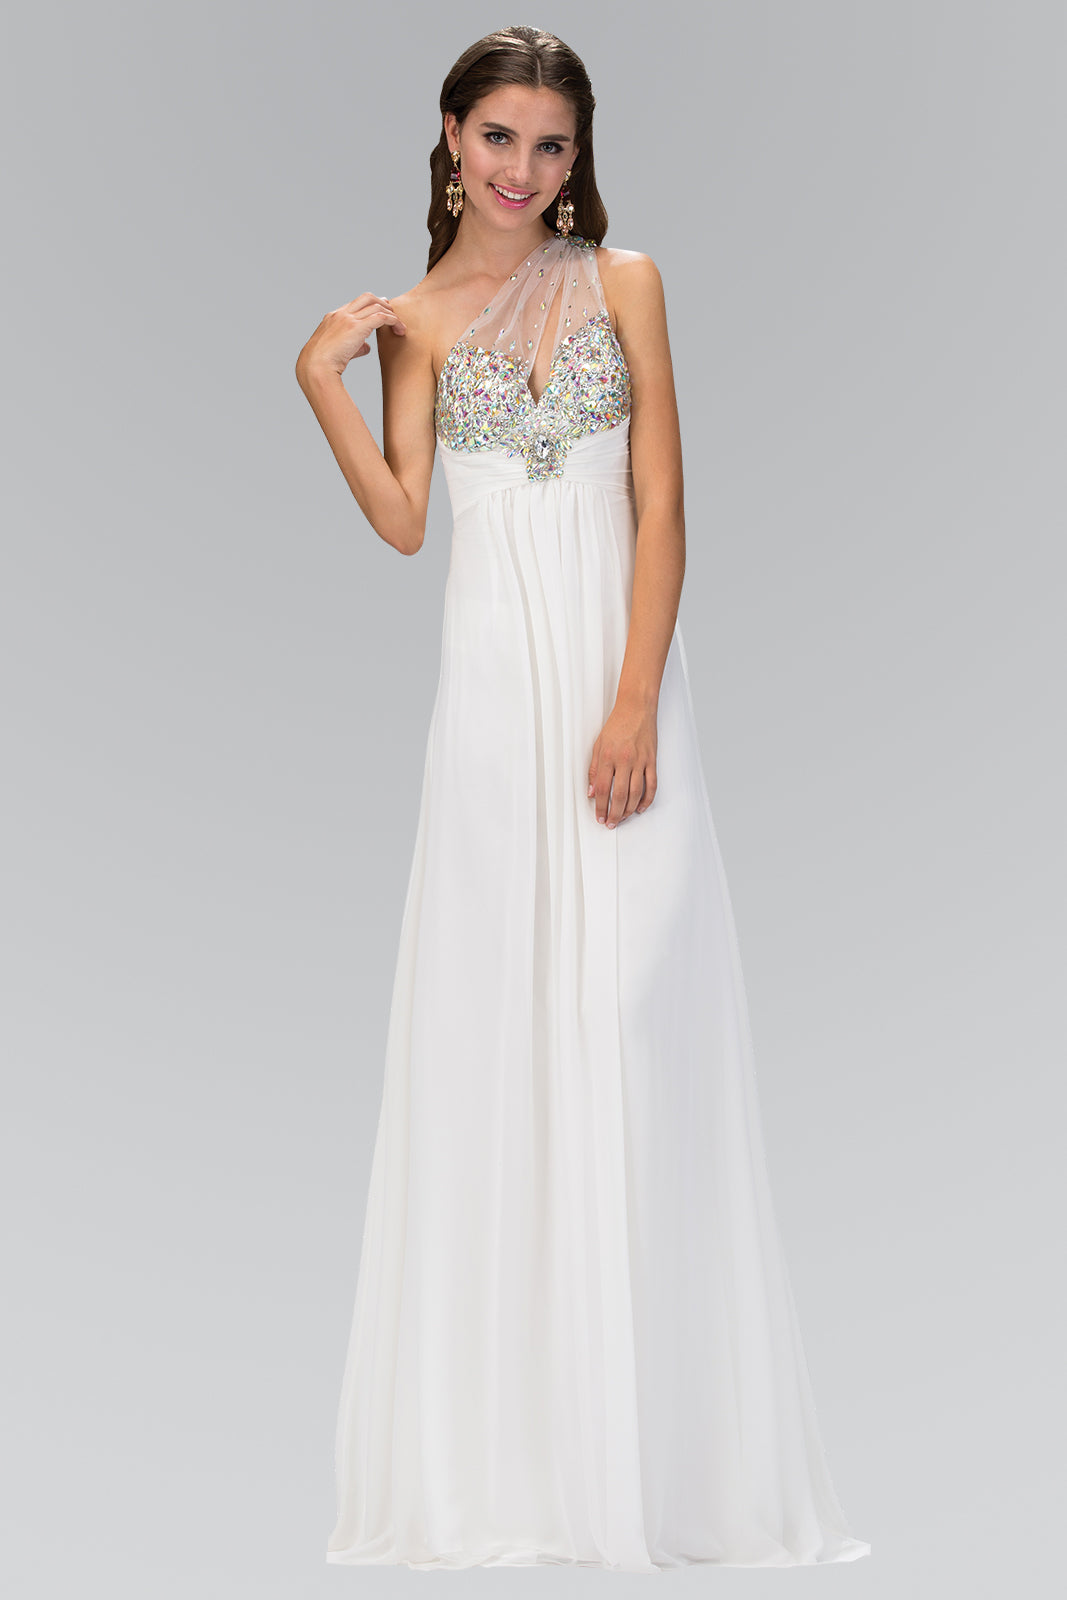 One Shoulder Chiffon Long Dress with Jewel Embellished Bodice and Ruched Waistline GLGL1138-0